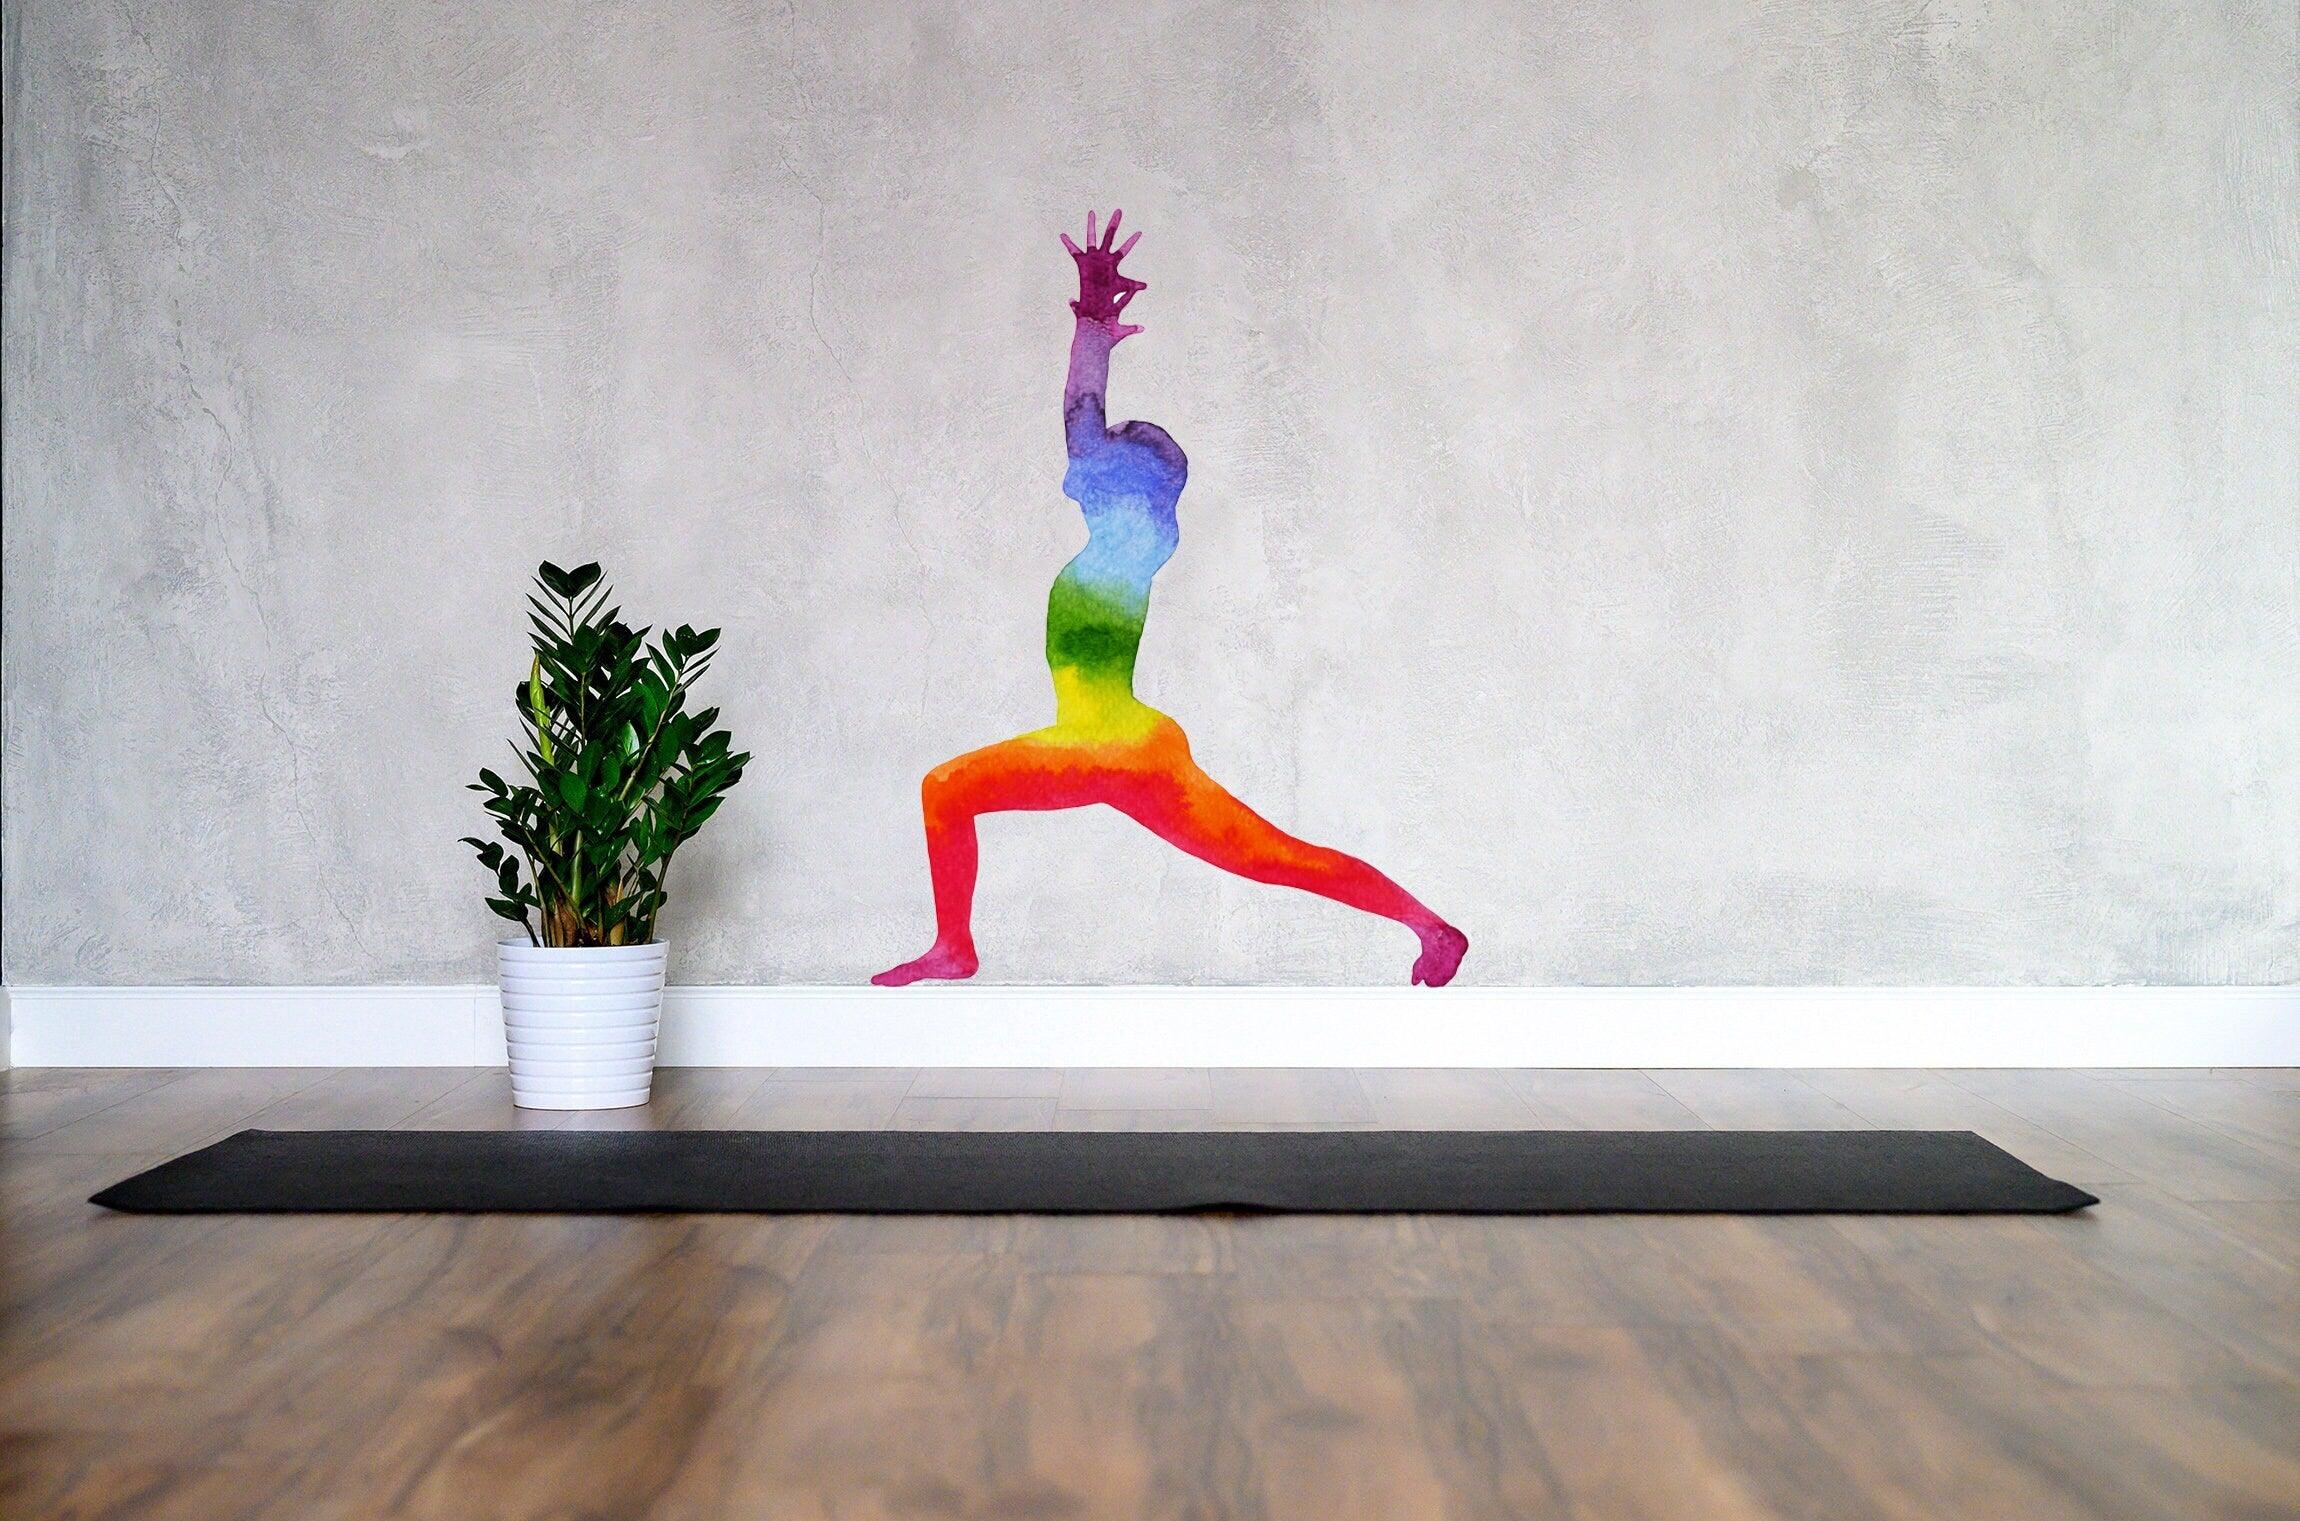 Yoga Wall Decal, Warrior Pose, Wellness, Chakra, Peace of Mind, exercise, Yoga Pose Sticker, No Wall Damage, Removable